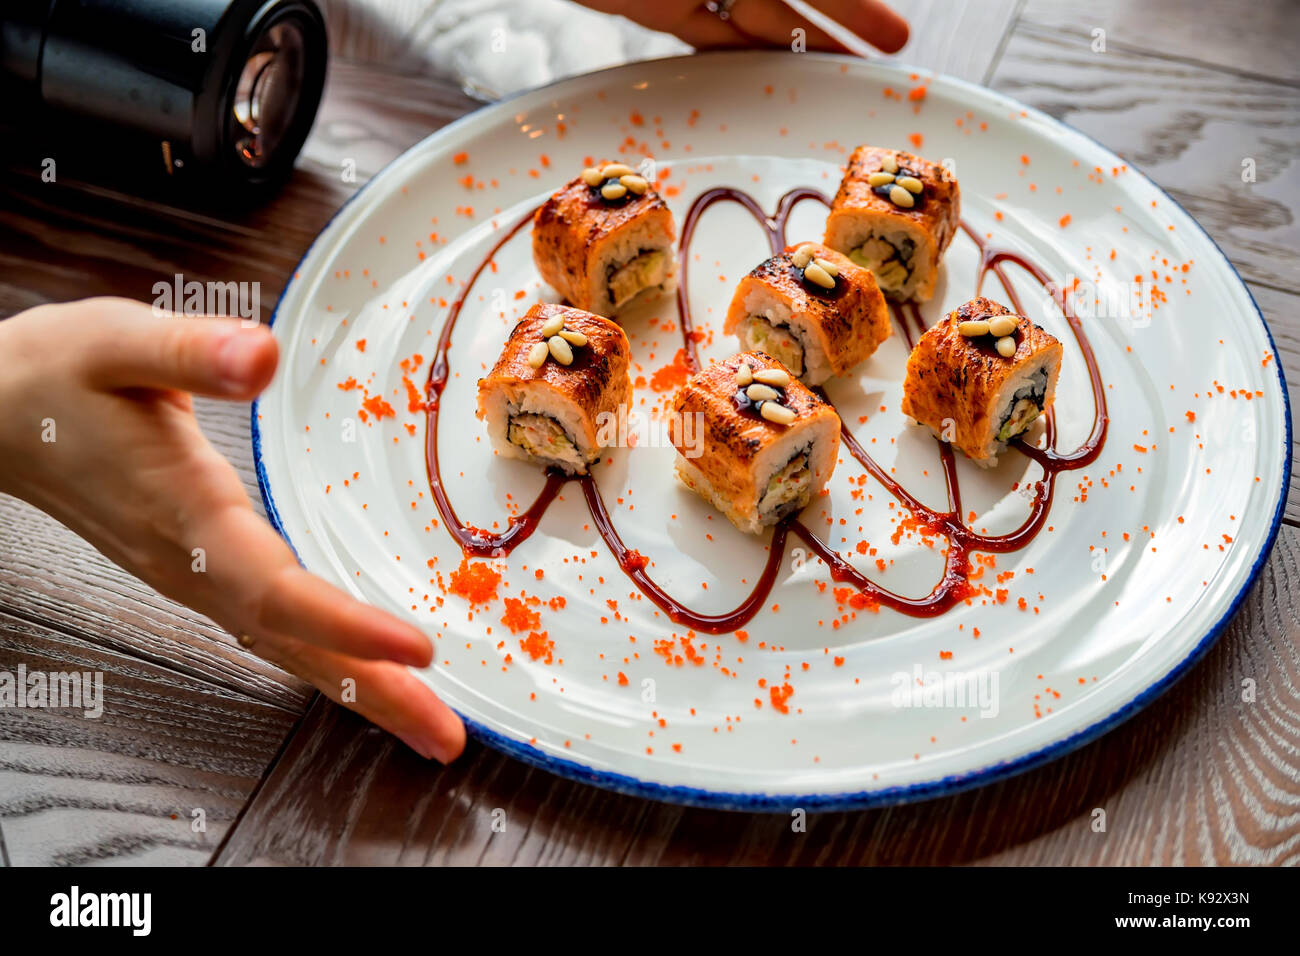 Food photographer takes picure of sushi rolls Stock Photo